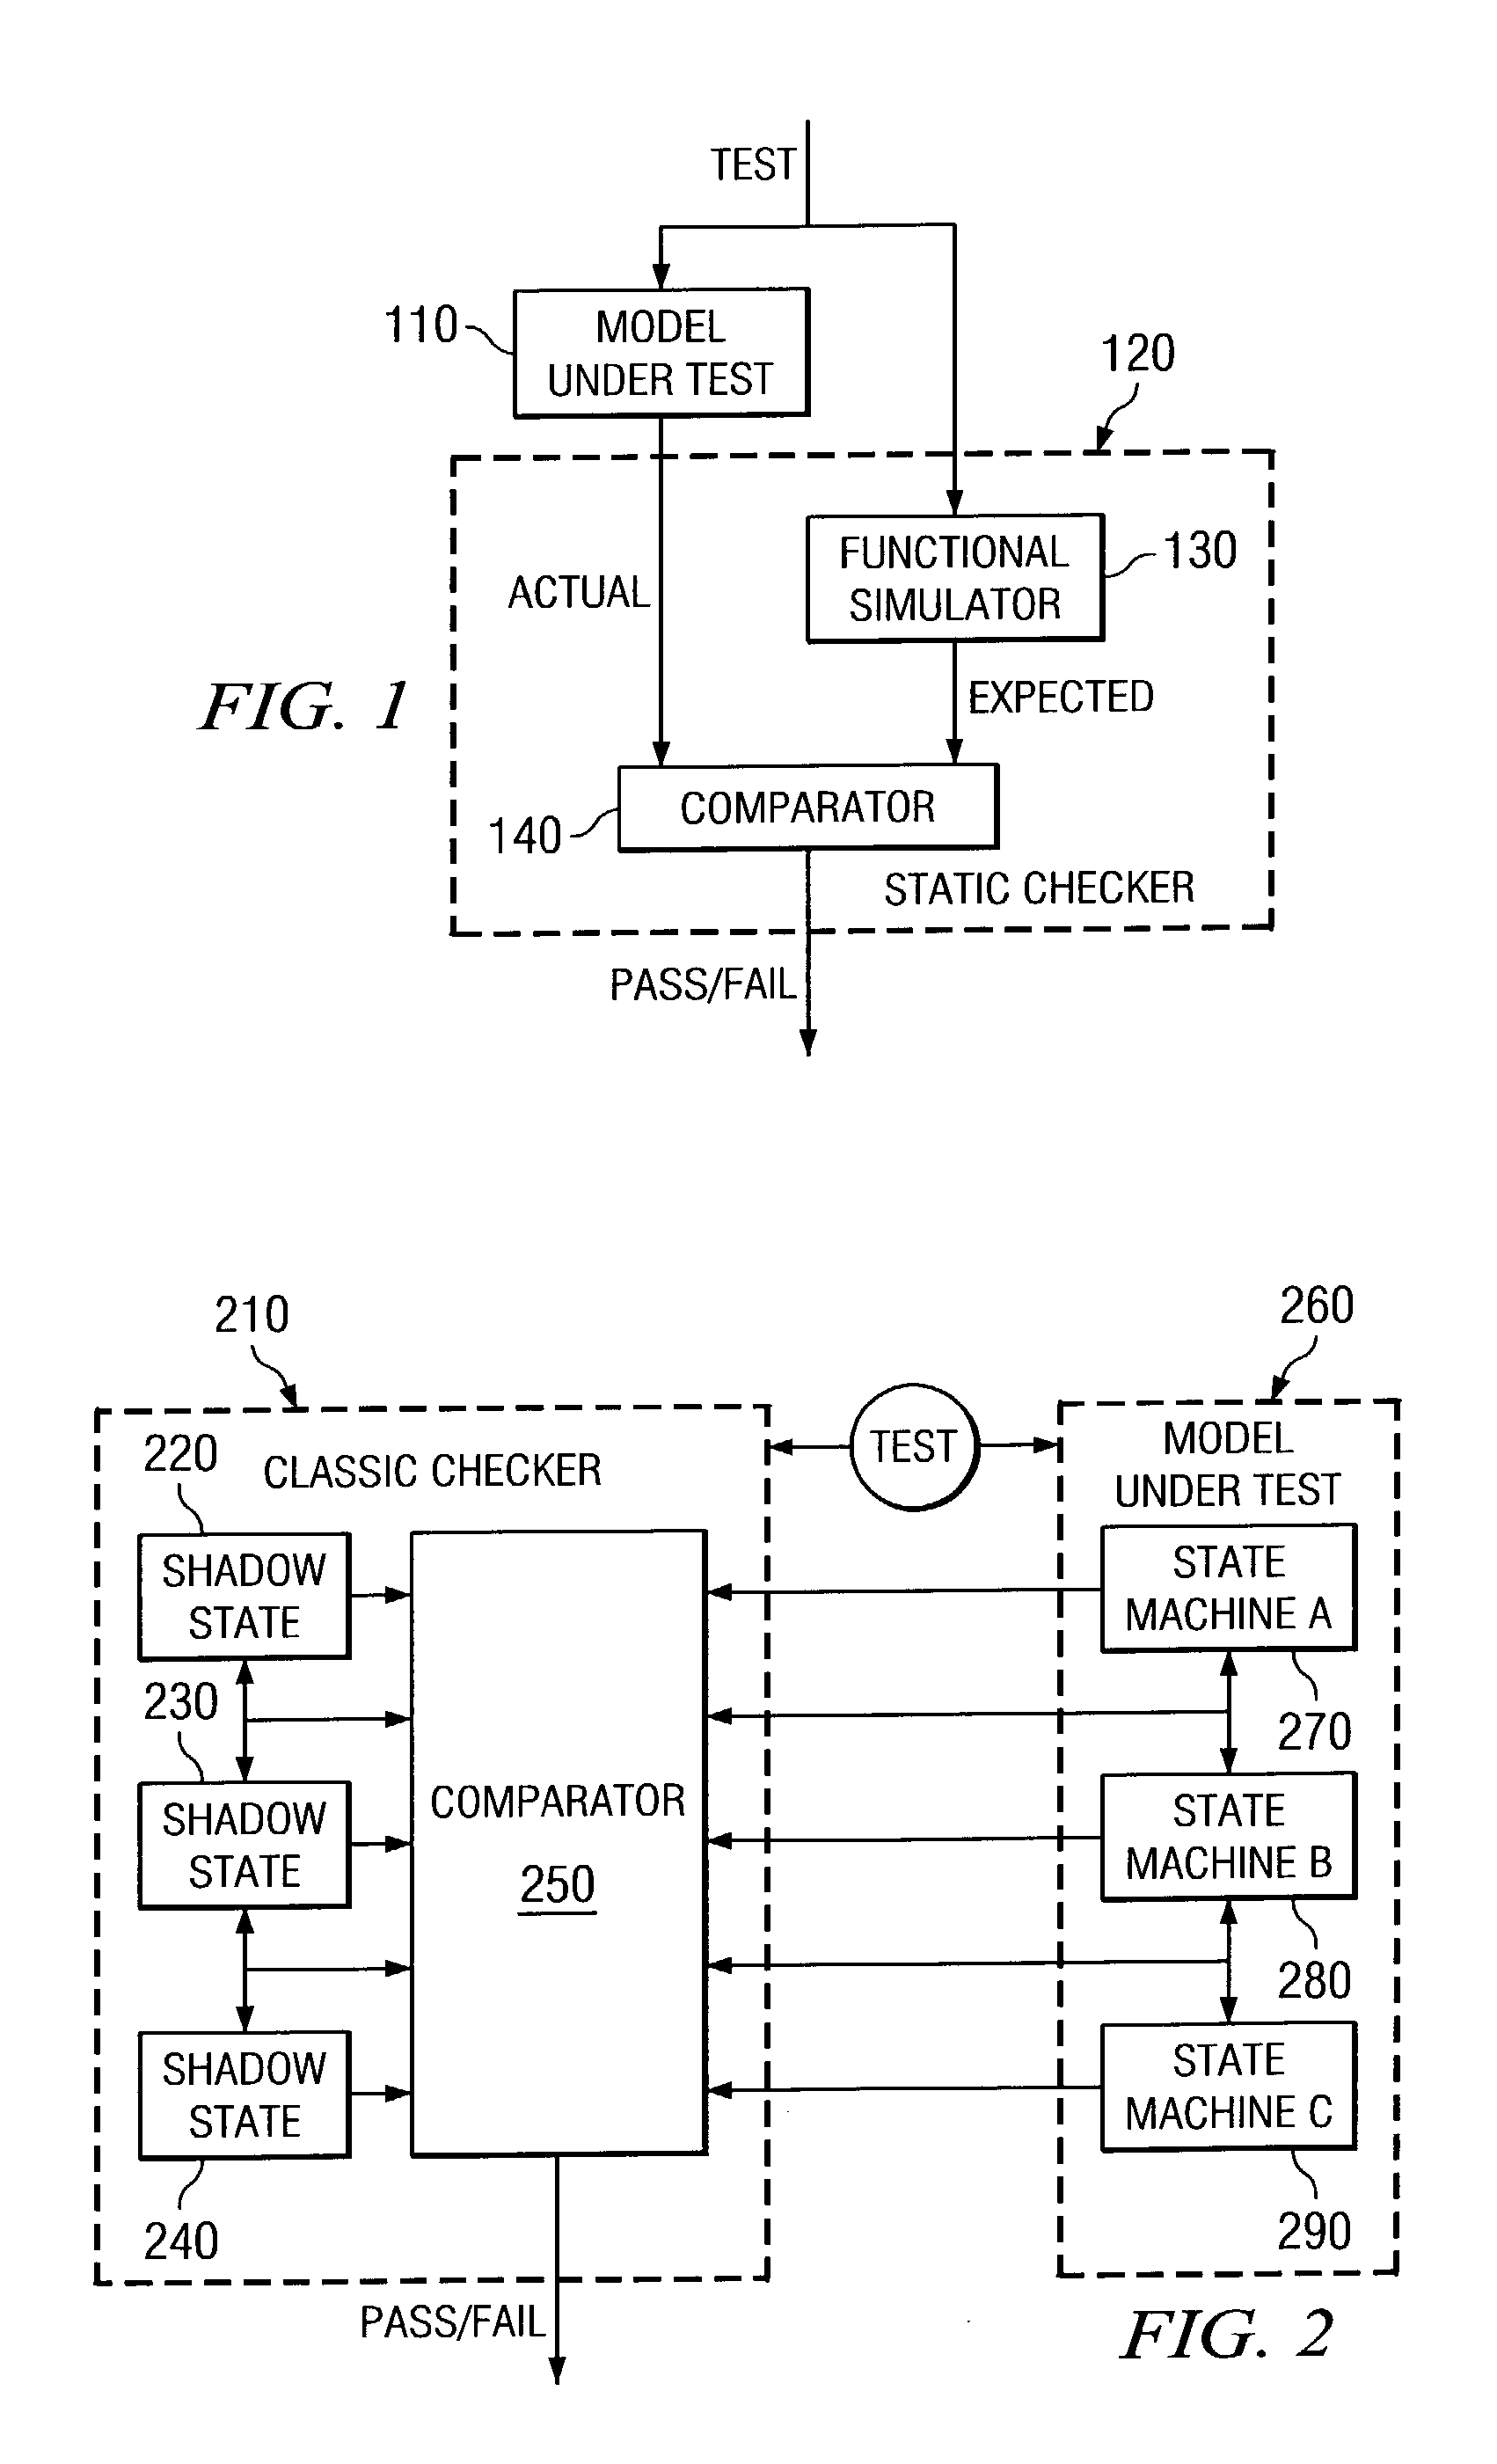 Method and apparatus for verification of coherence for shared cache components in a system verification environment